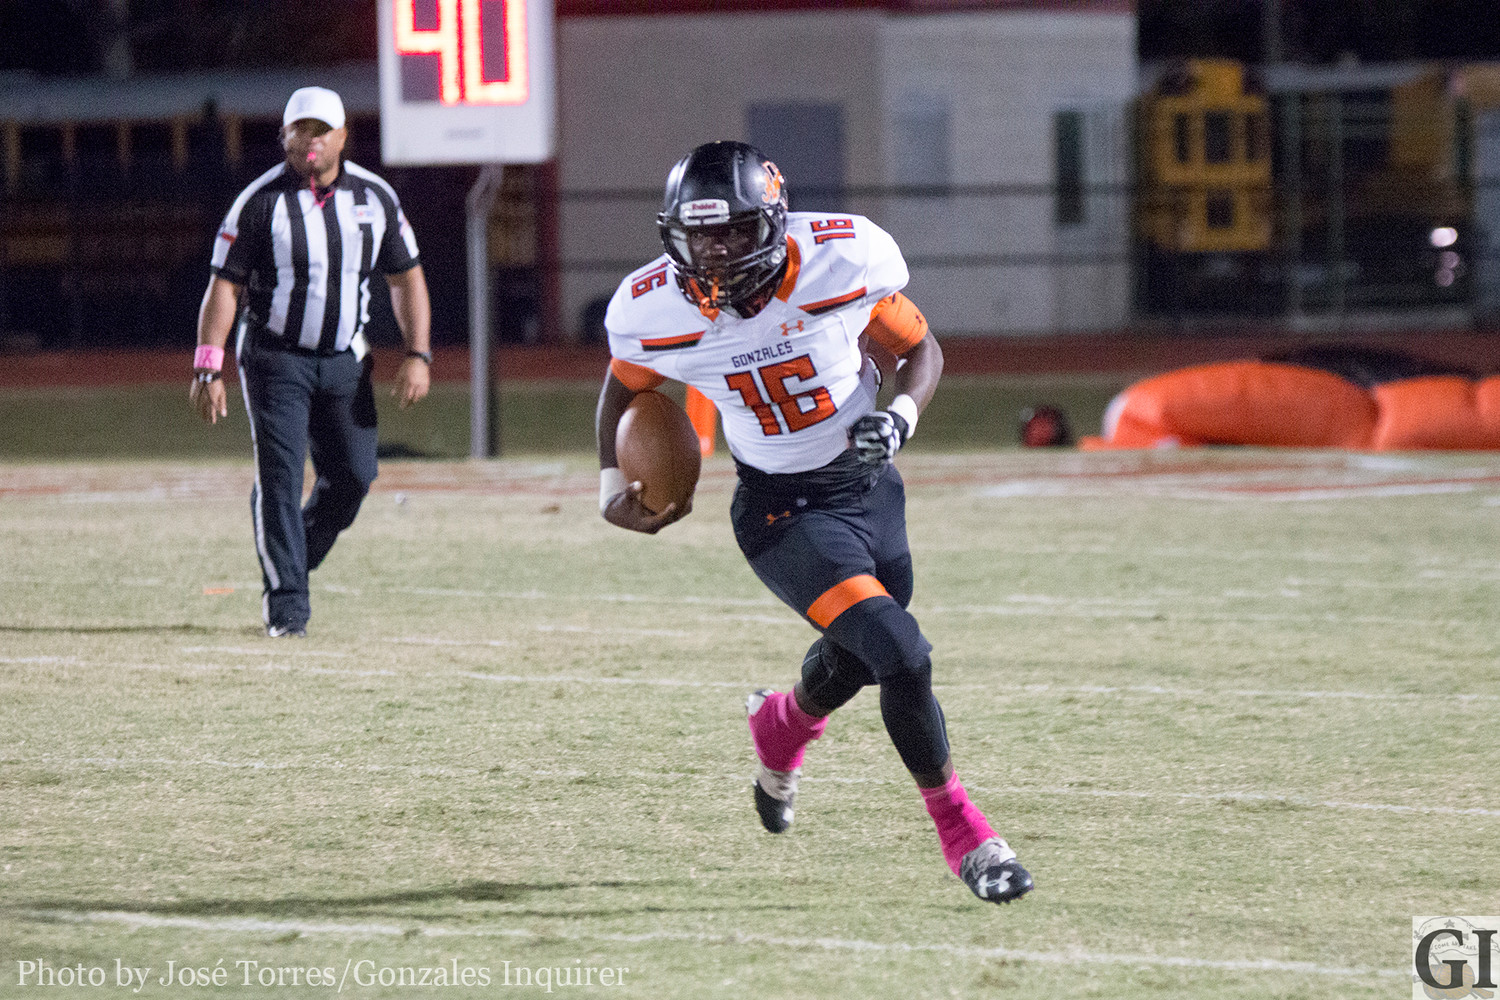 Sophomore back Elijah Holiday (16) carries the ball in Gonzales' 17-14 win.